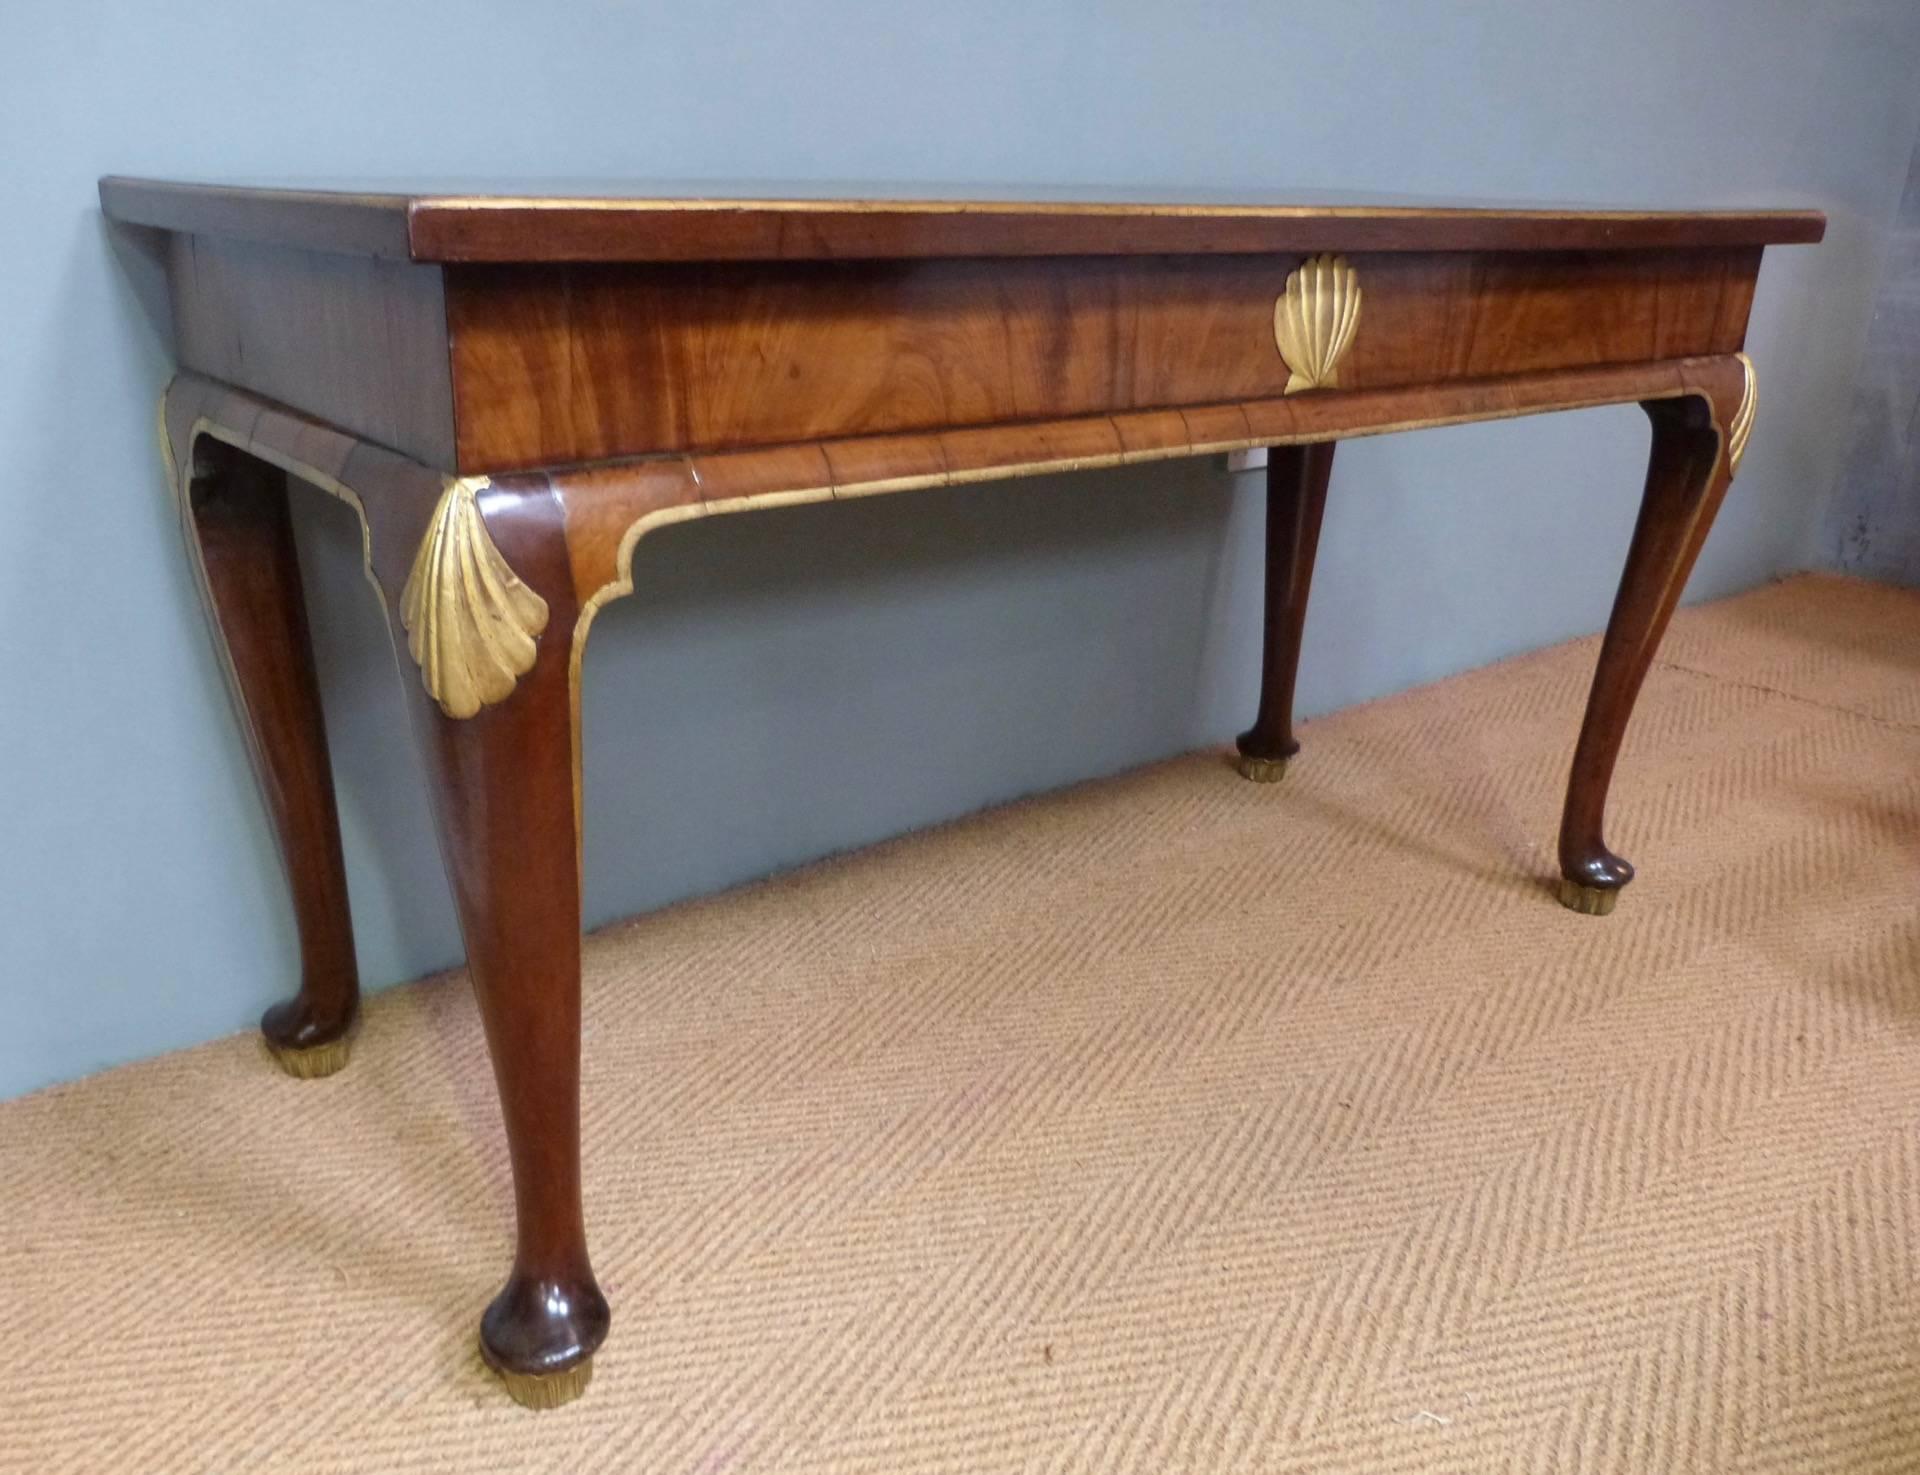 A George II style console table with parcel-gilt decoration, circa 1880.